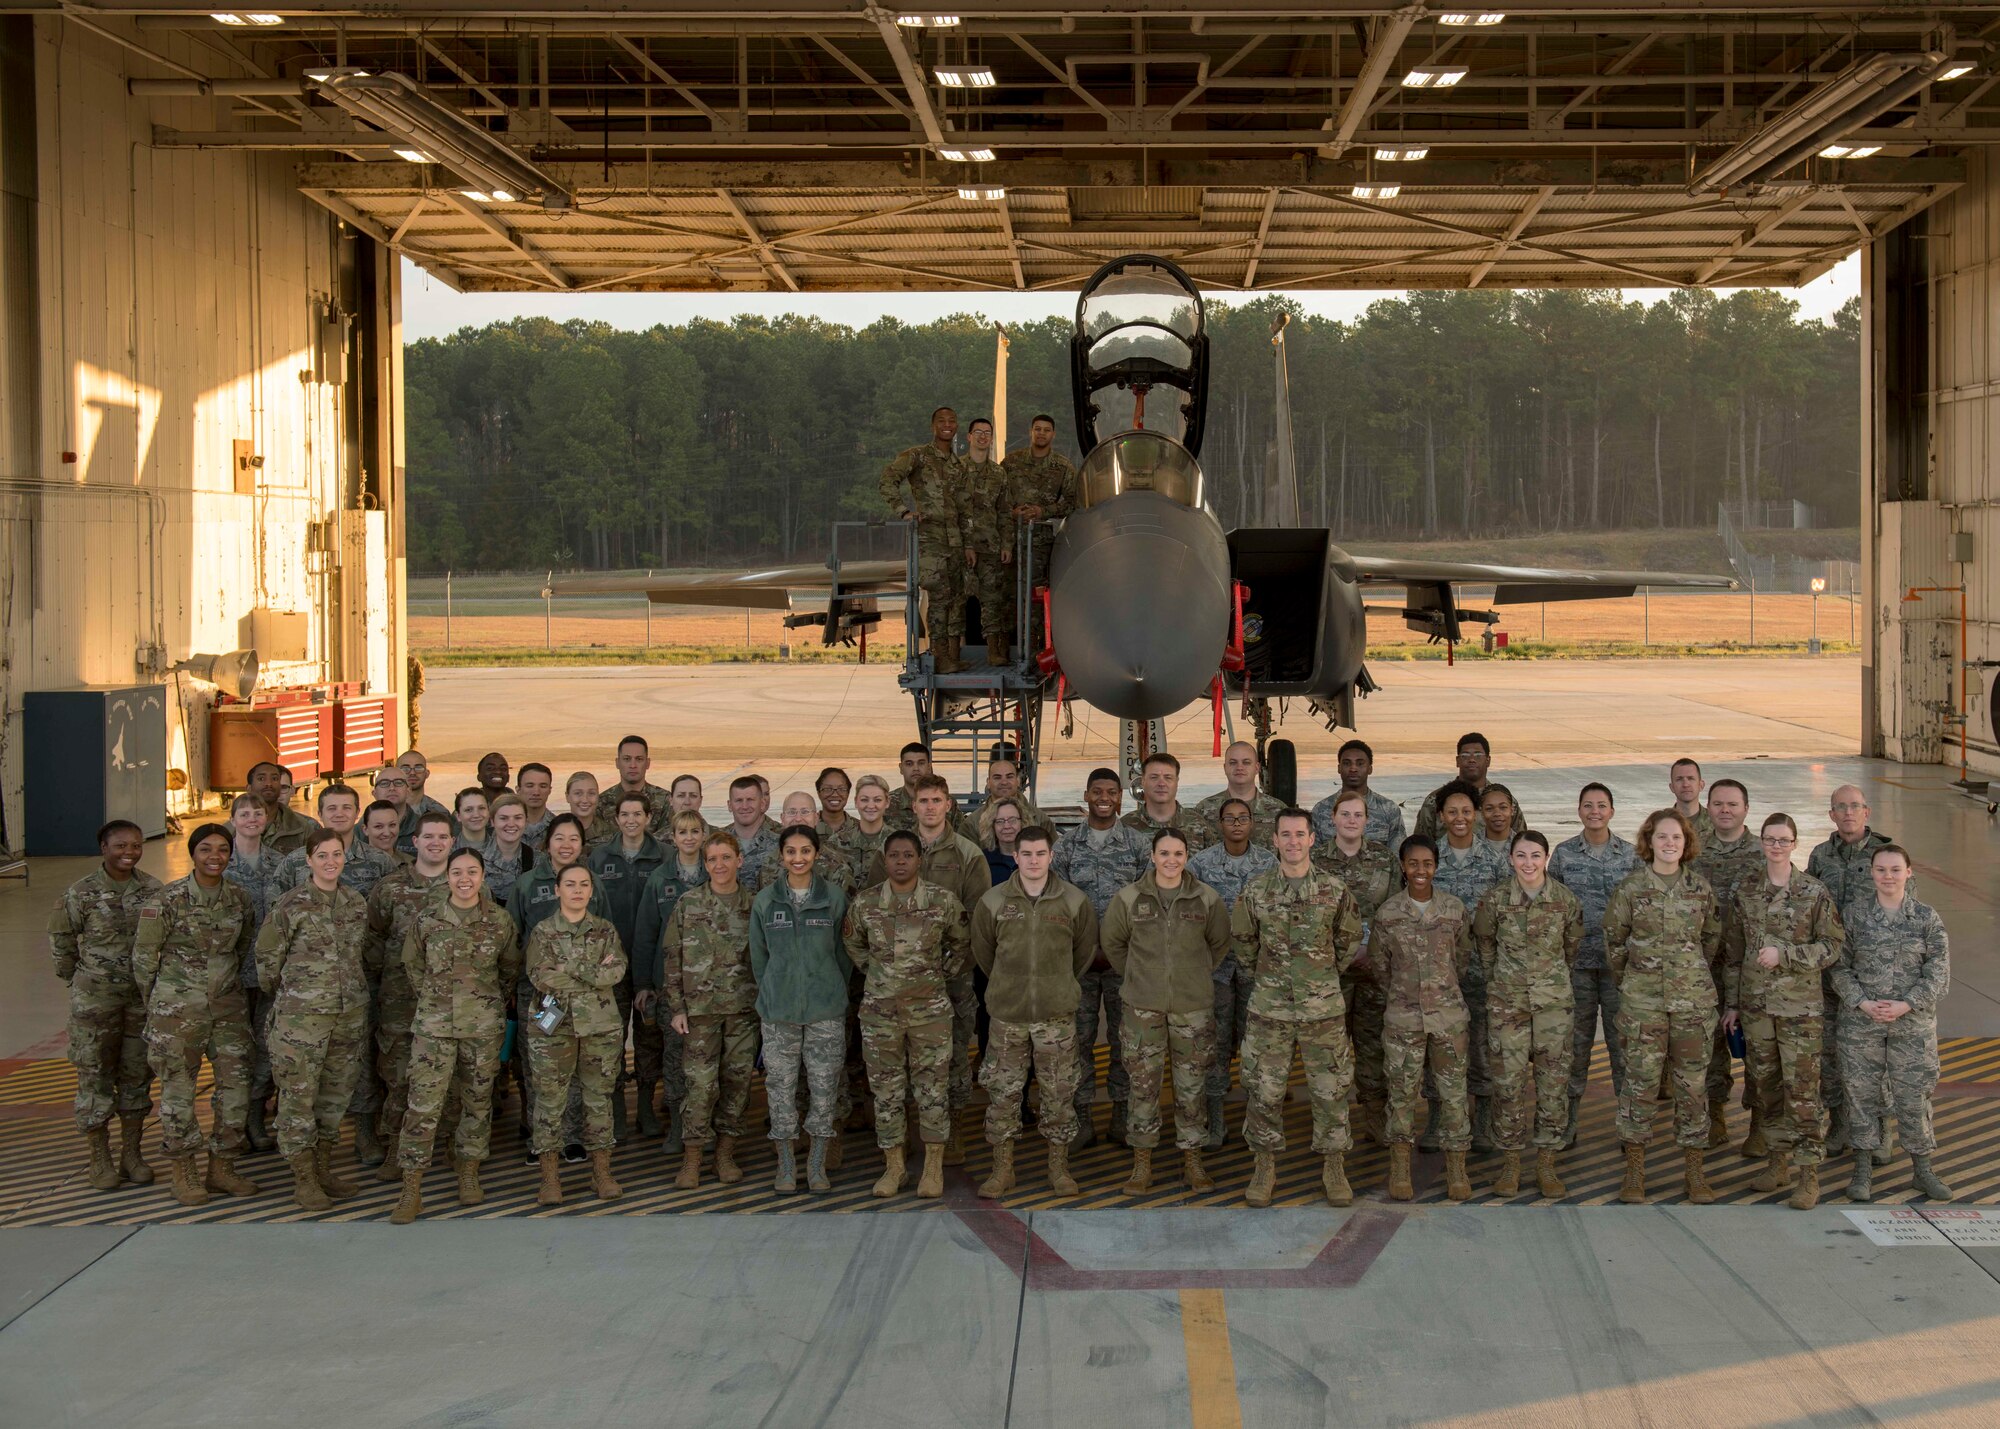 Airmen from the 4th Operations Medical Readiness Squadron pose for a photo in front of an F-15E Strike Eagle, March 11, 2020, at Seymour Johnson Air Force Base, N.C.